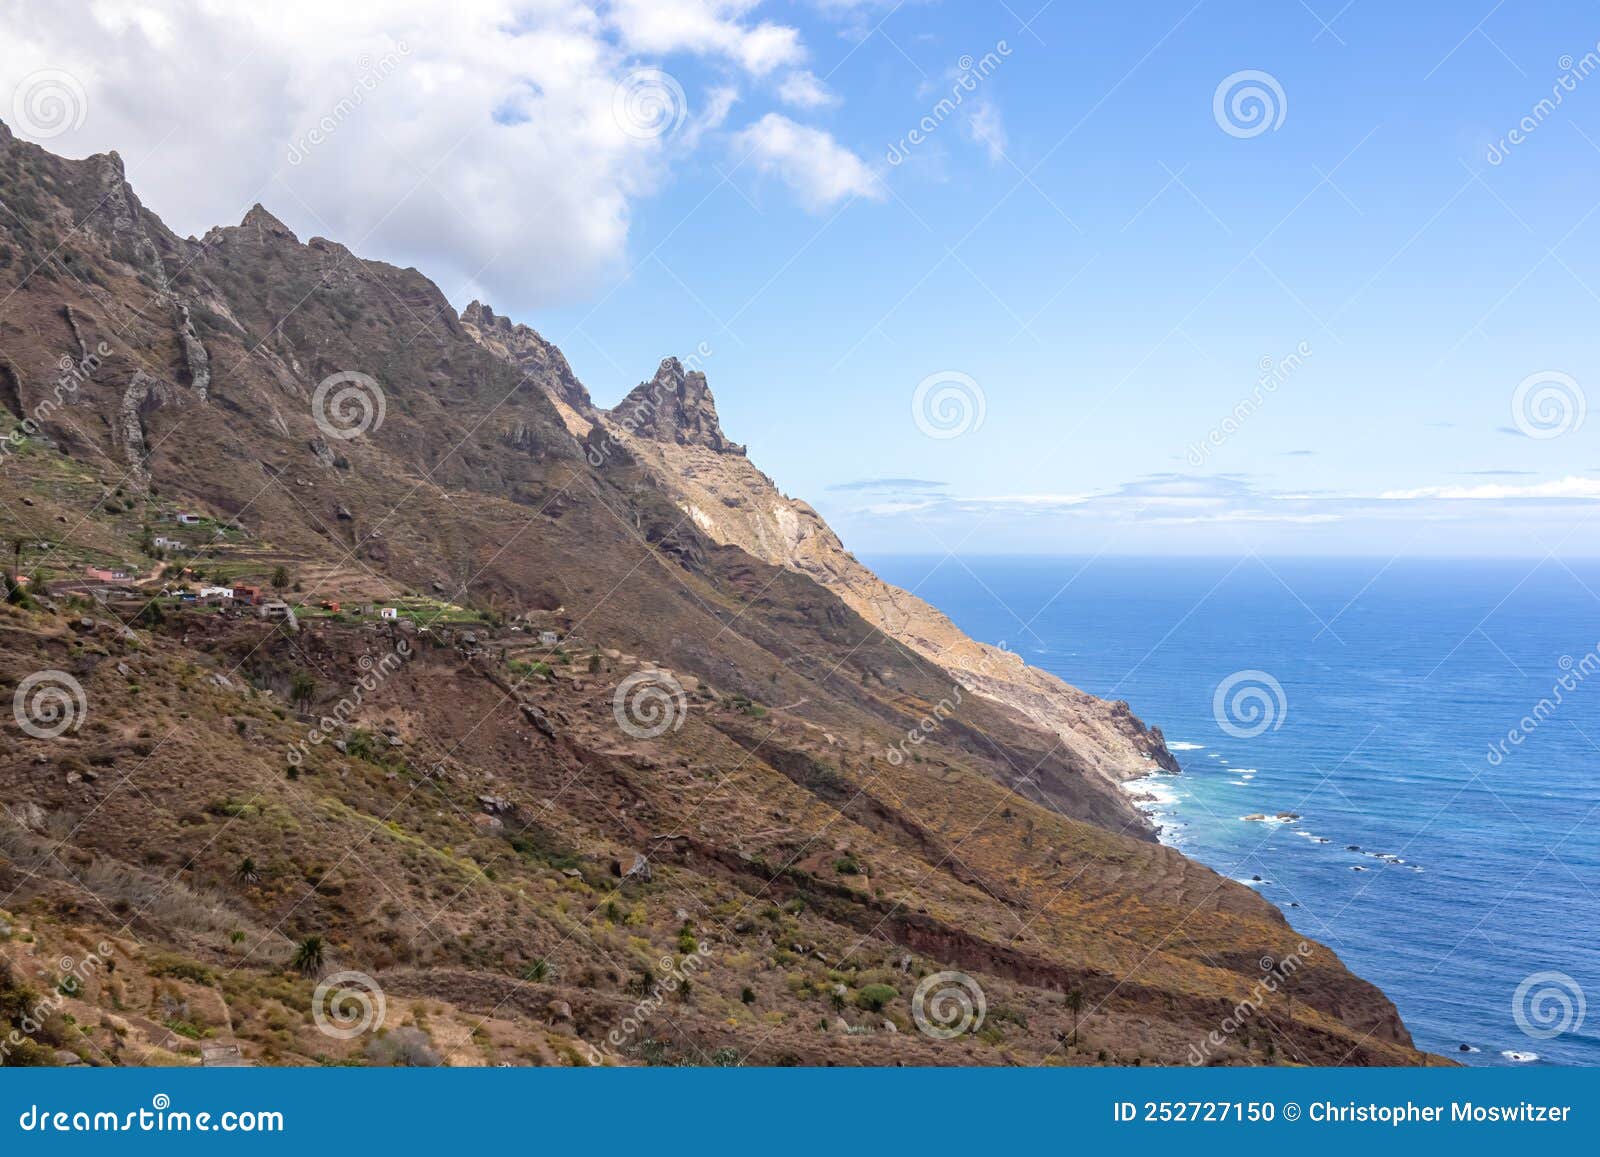 panoramic view of the coastline of the anaga mountain range on tenerife, canary islands, spain. view on cabezo el tablero crag